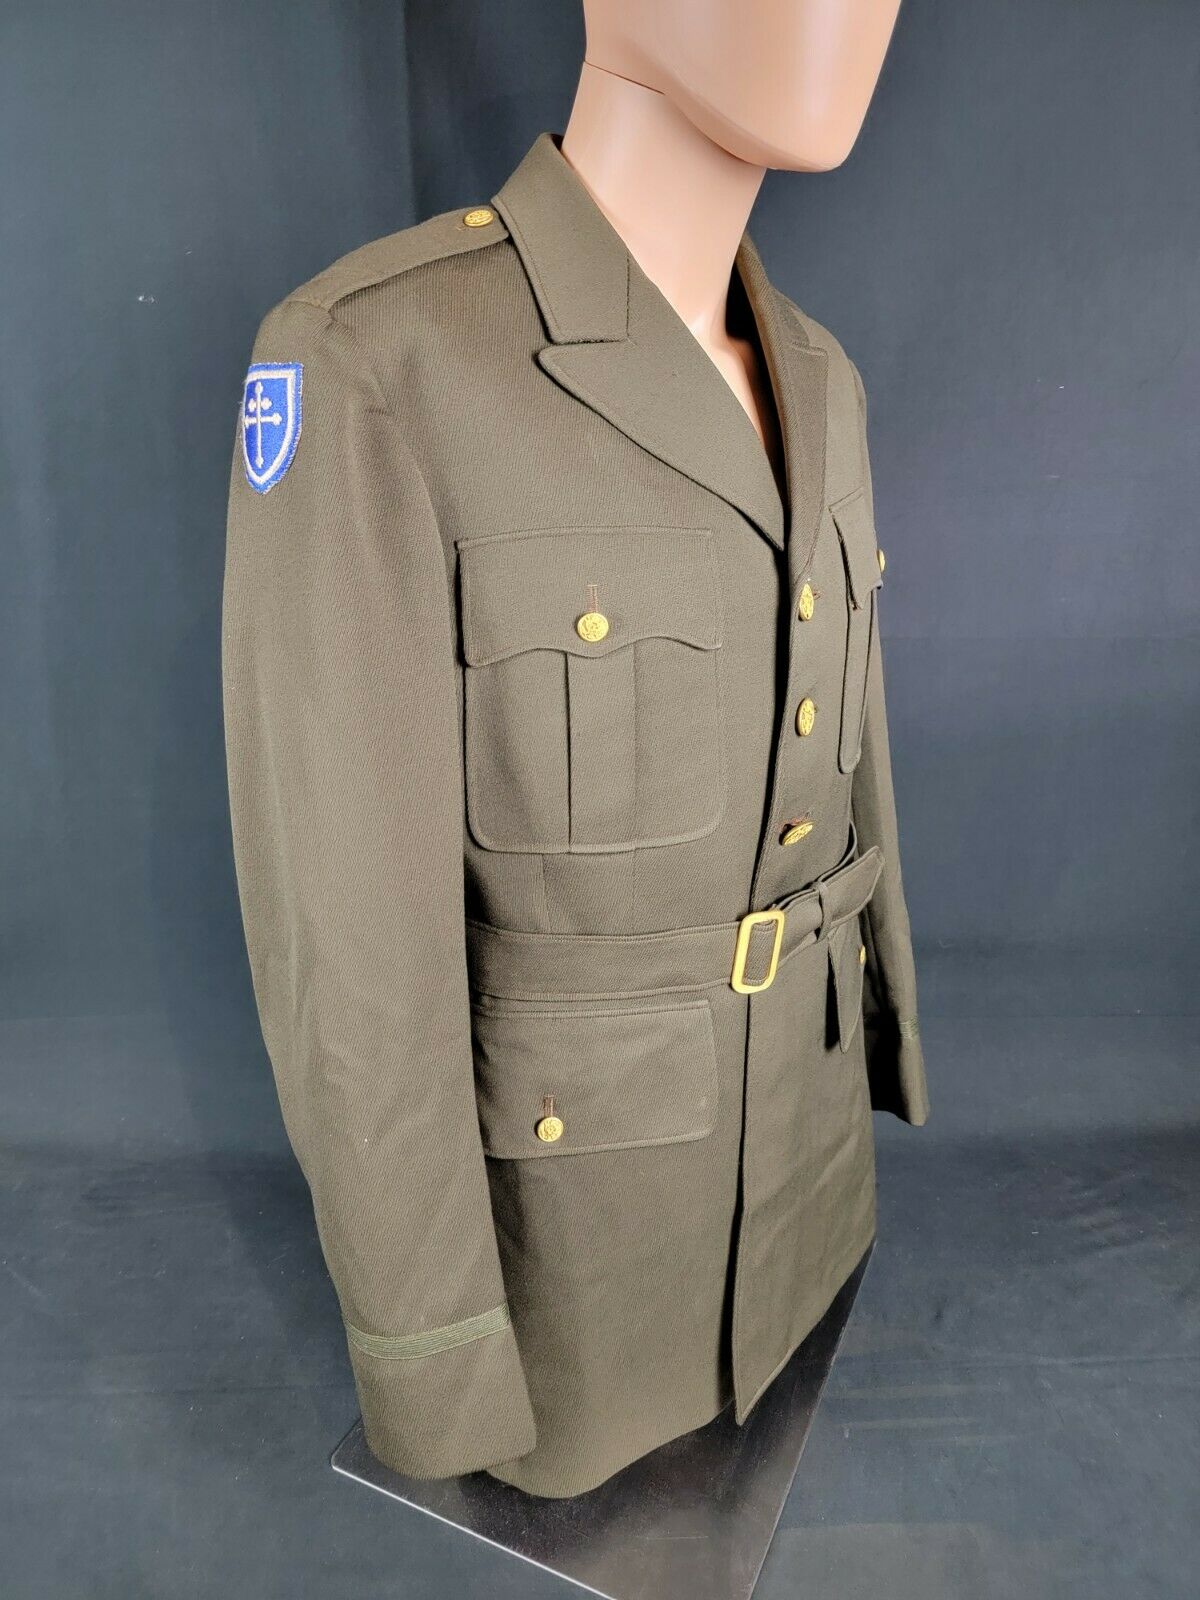 Ww2 79th Division Officers Uniform